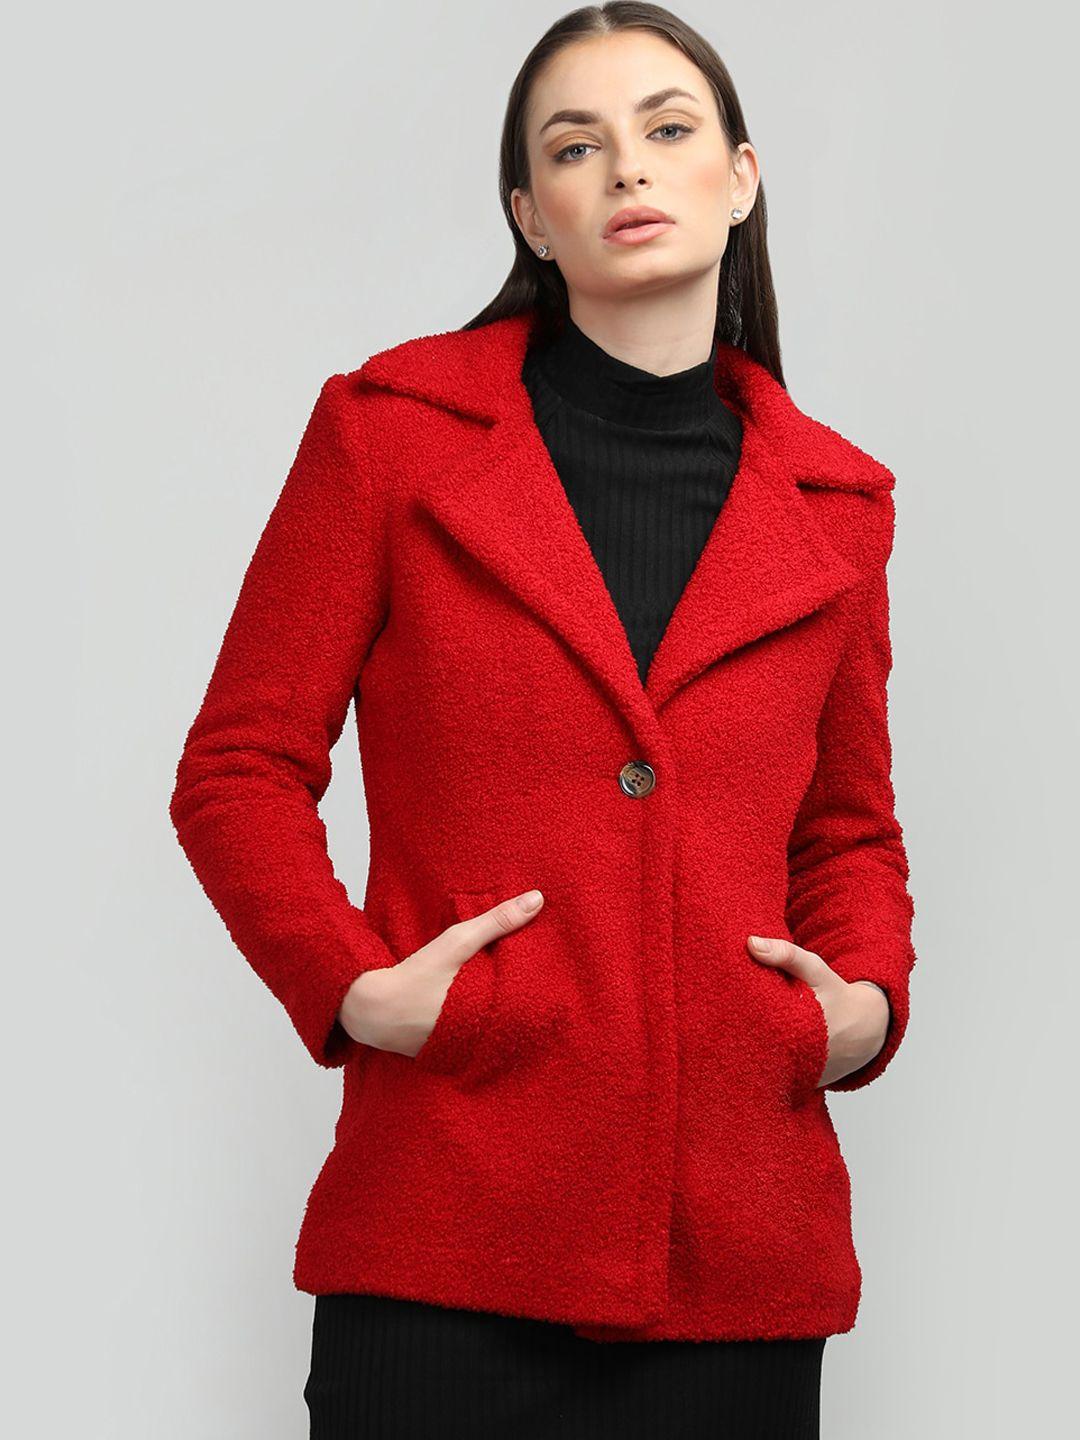 honnete single breasted notched lapel coat